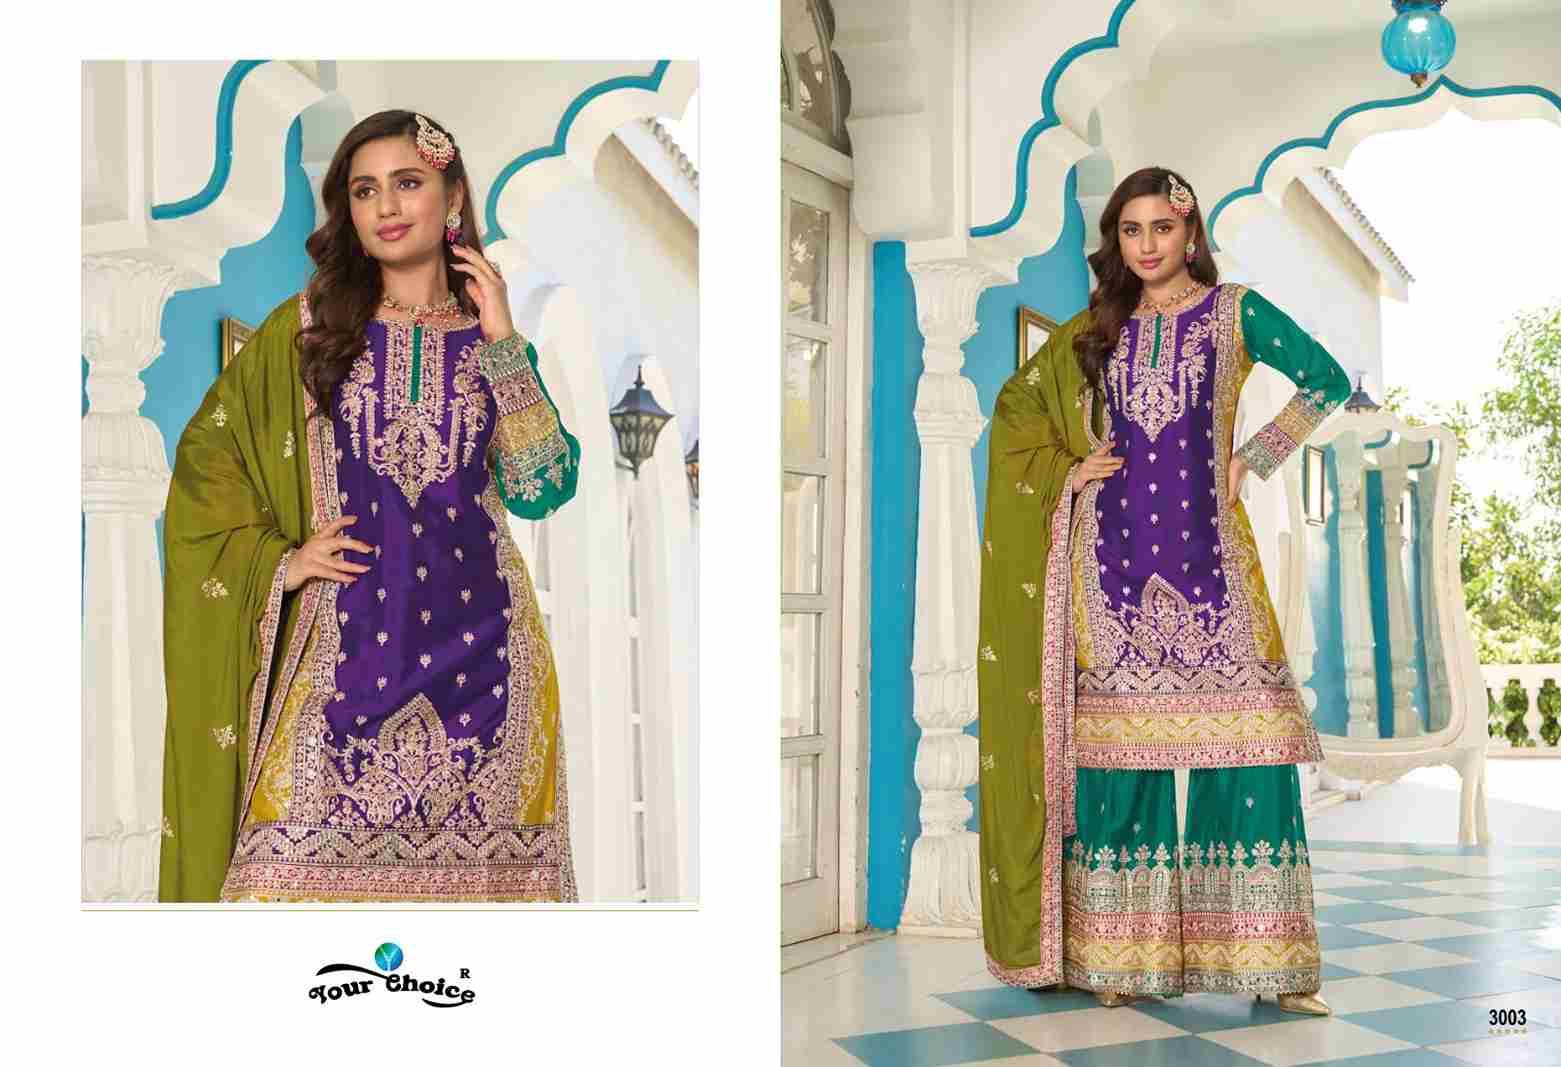 Beeba By Your Choice 3001 To 3003 Series Beautiful Sharara Suits Colorful Stylish Fancy Casual Wear & Ethnic Wear Pure Georgette Dresses At Wholesale Price